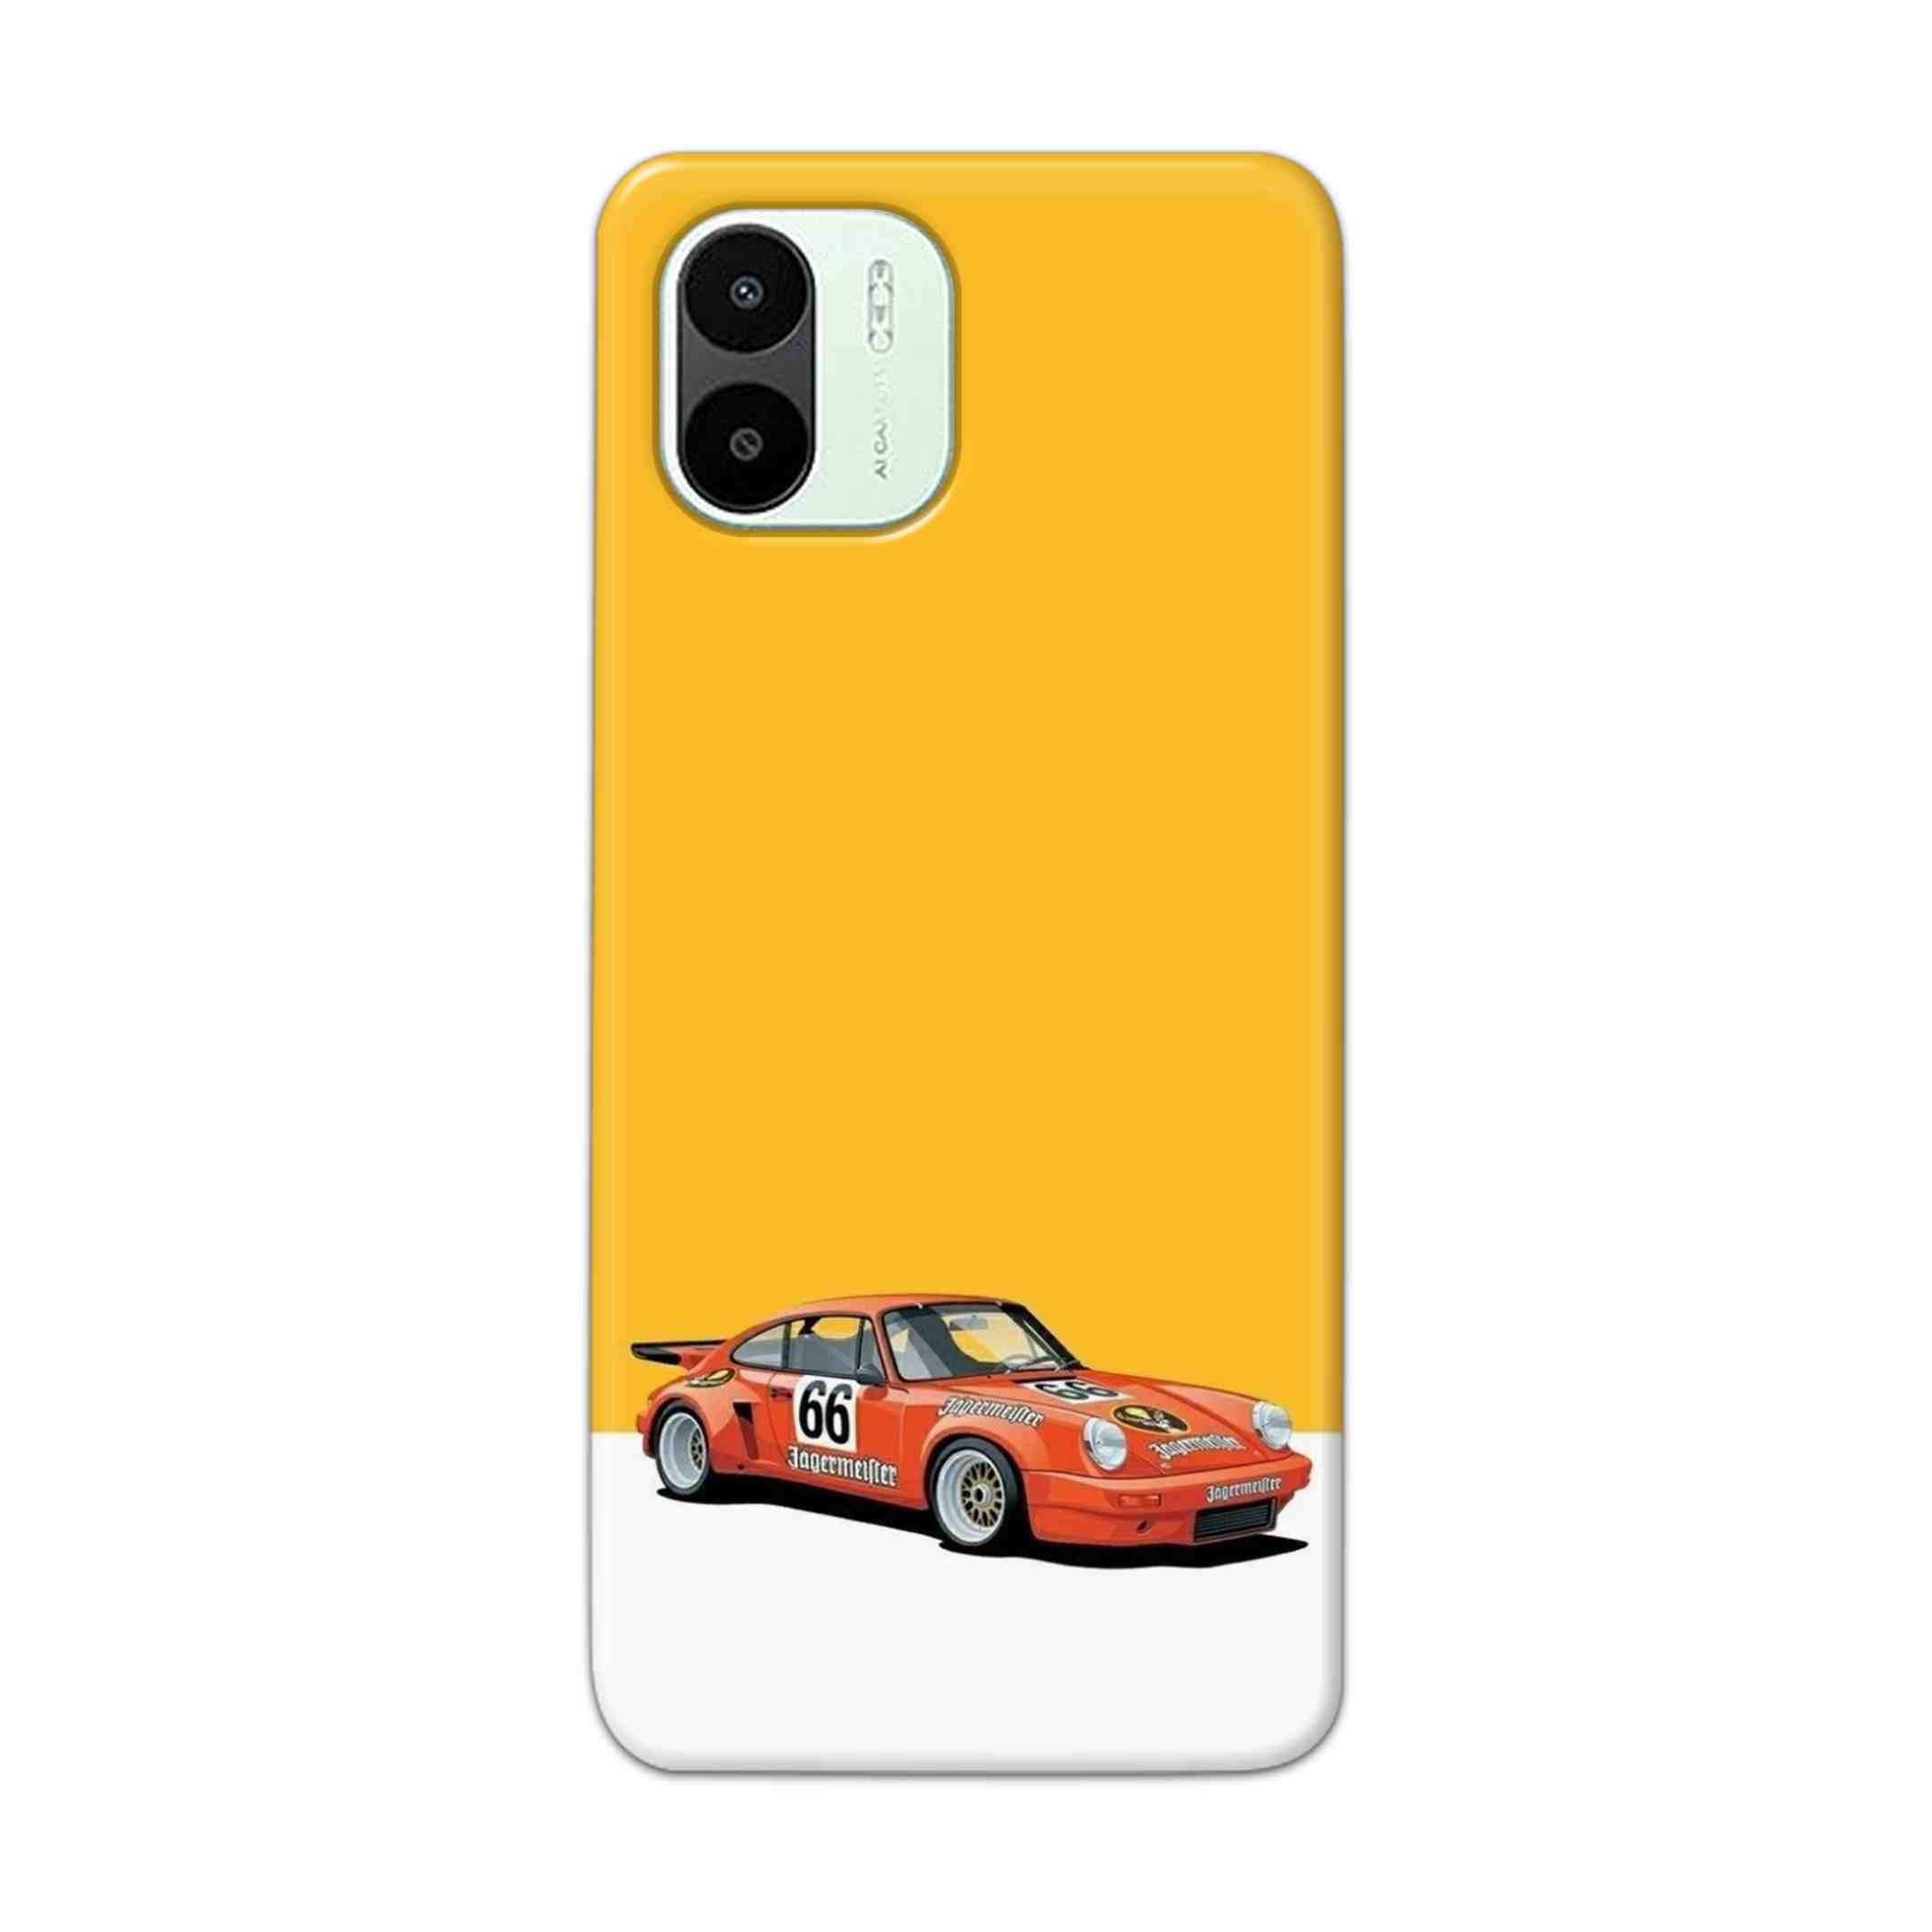 Buy Porche Hard Back Mobile Phone Case Cover For Xiaomi Redmi A1 5G Online